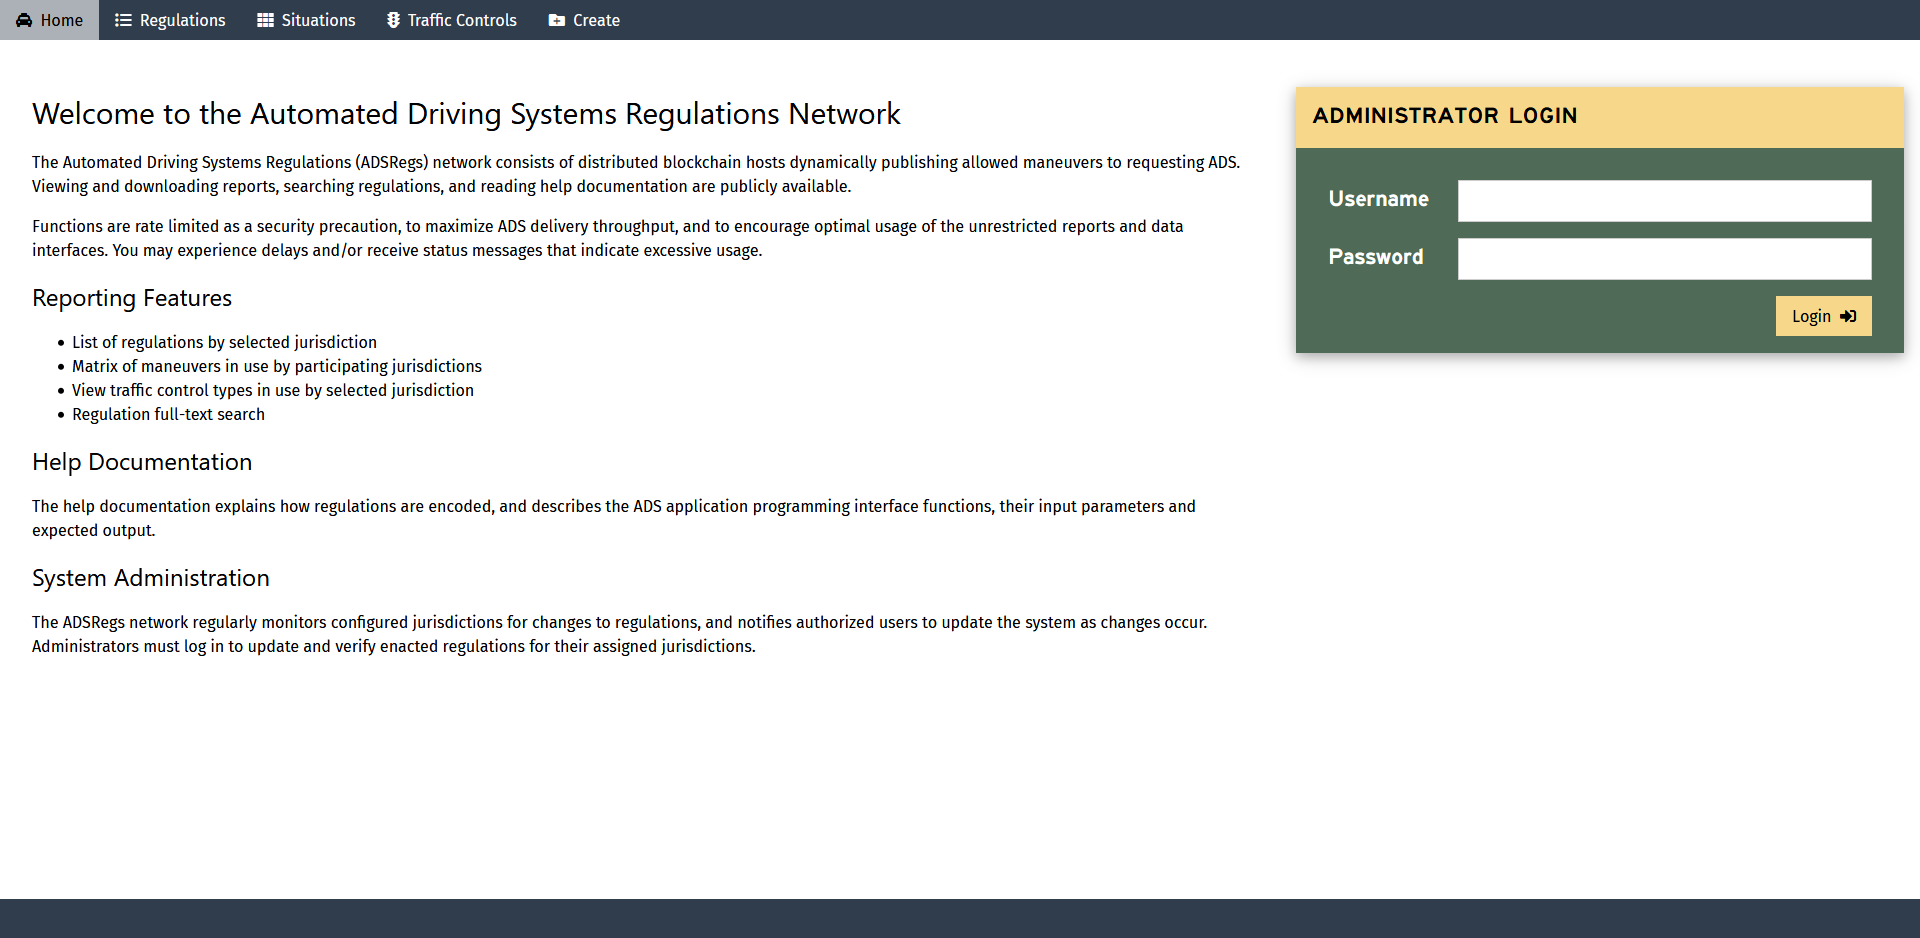 Screen capture of the home page for the Automated Driving Systems Regulations Network.